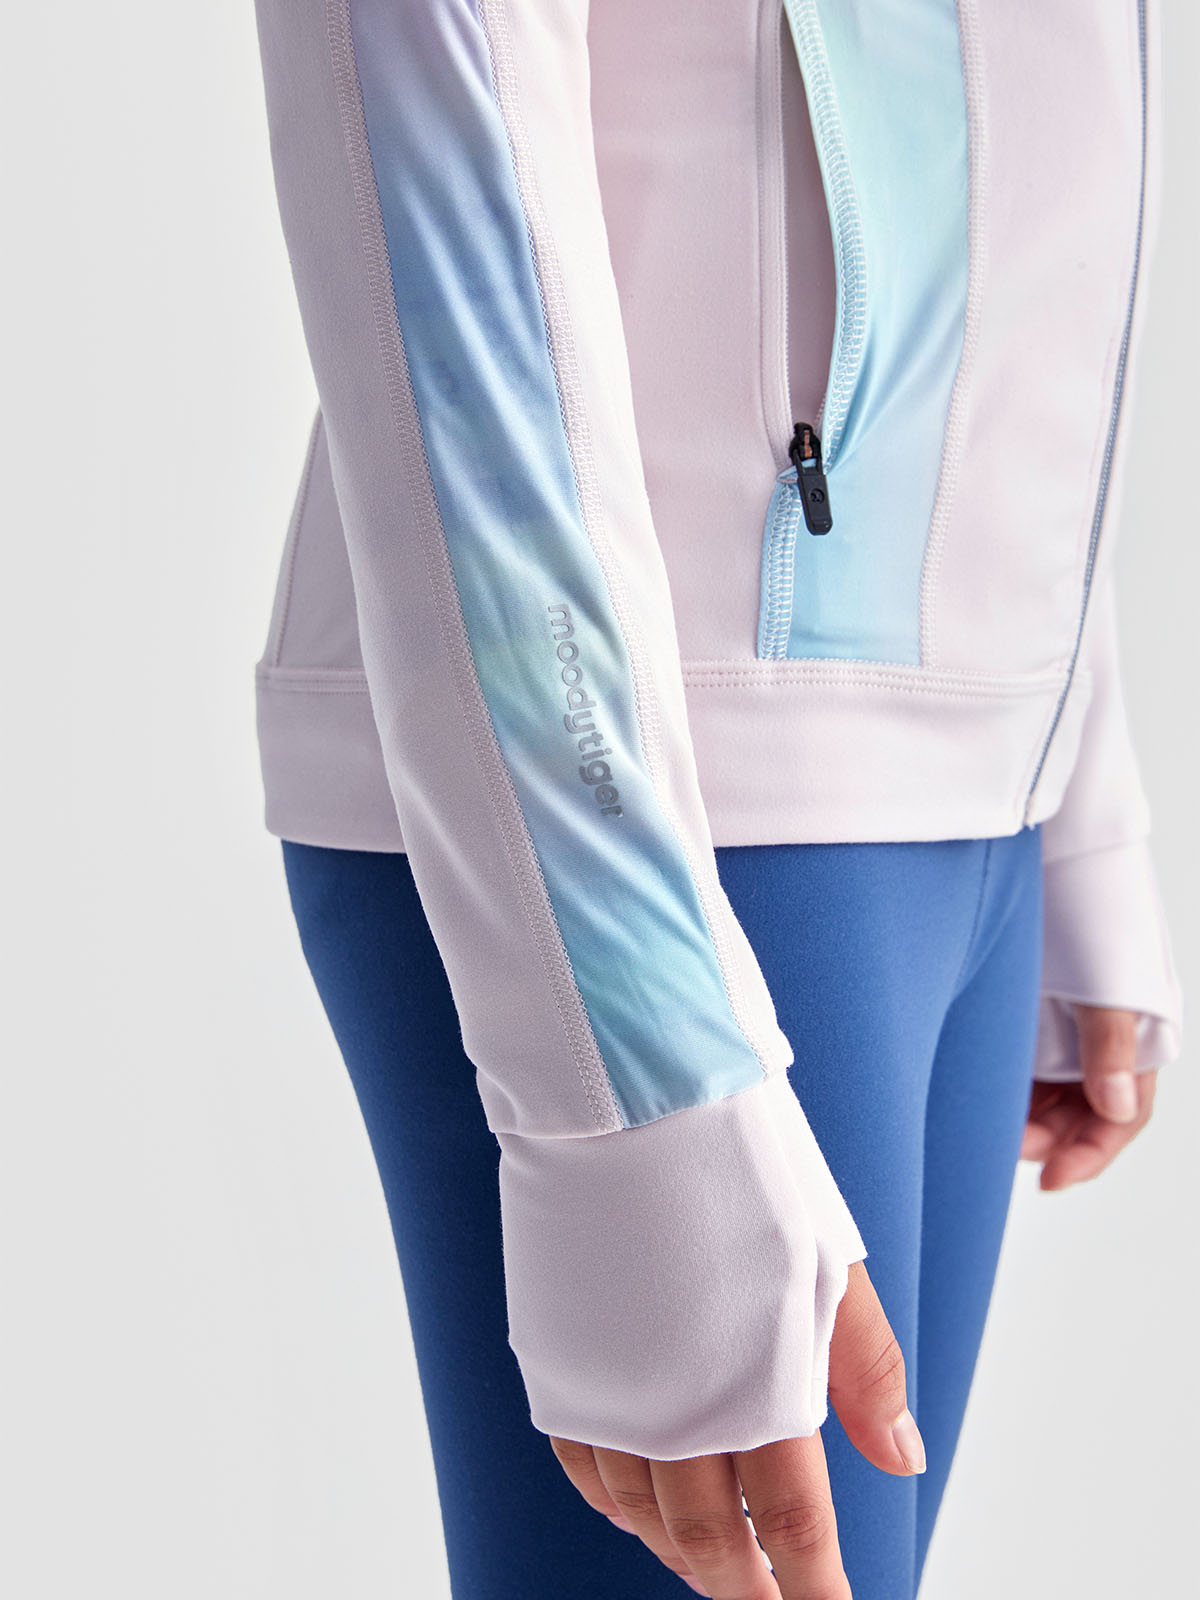 Perfect Your Practice Jacket